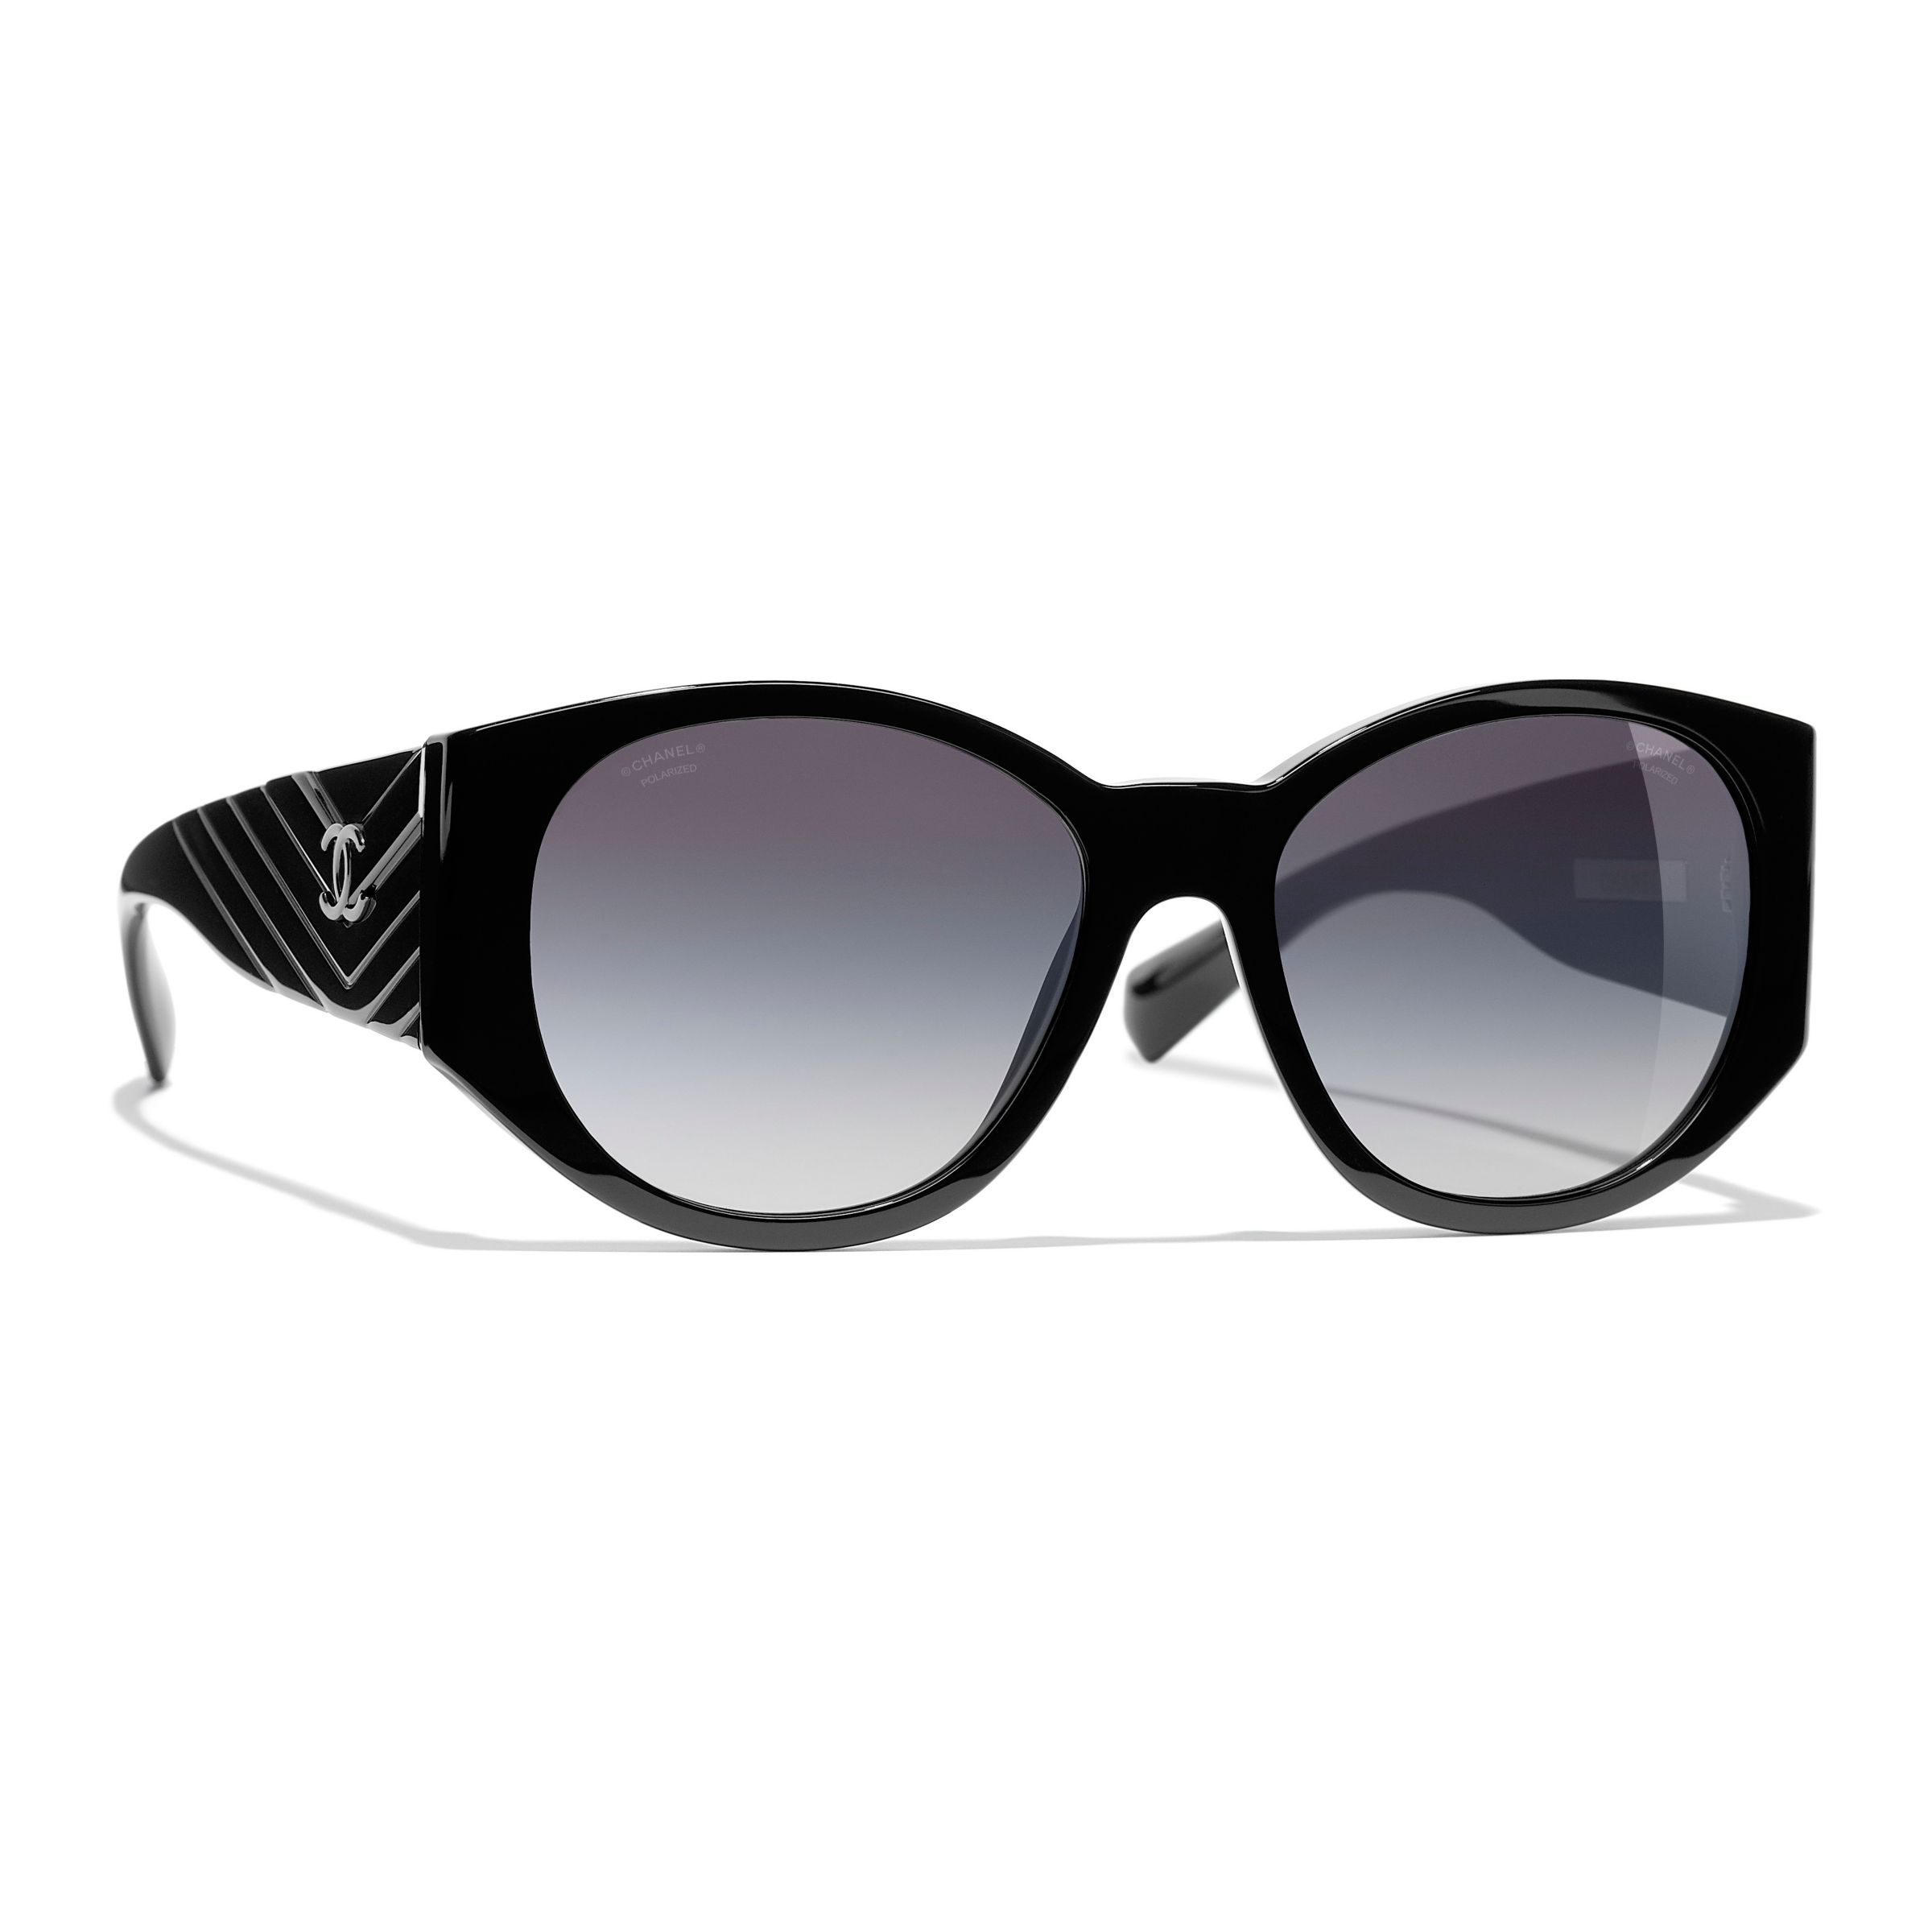 CHANEL Oval Sunglasses CH5411 Black/Grey at John Lewis & Partners